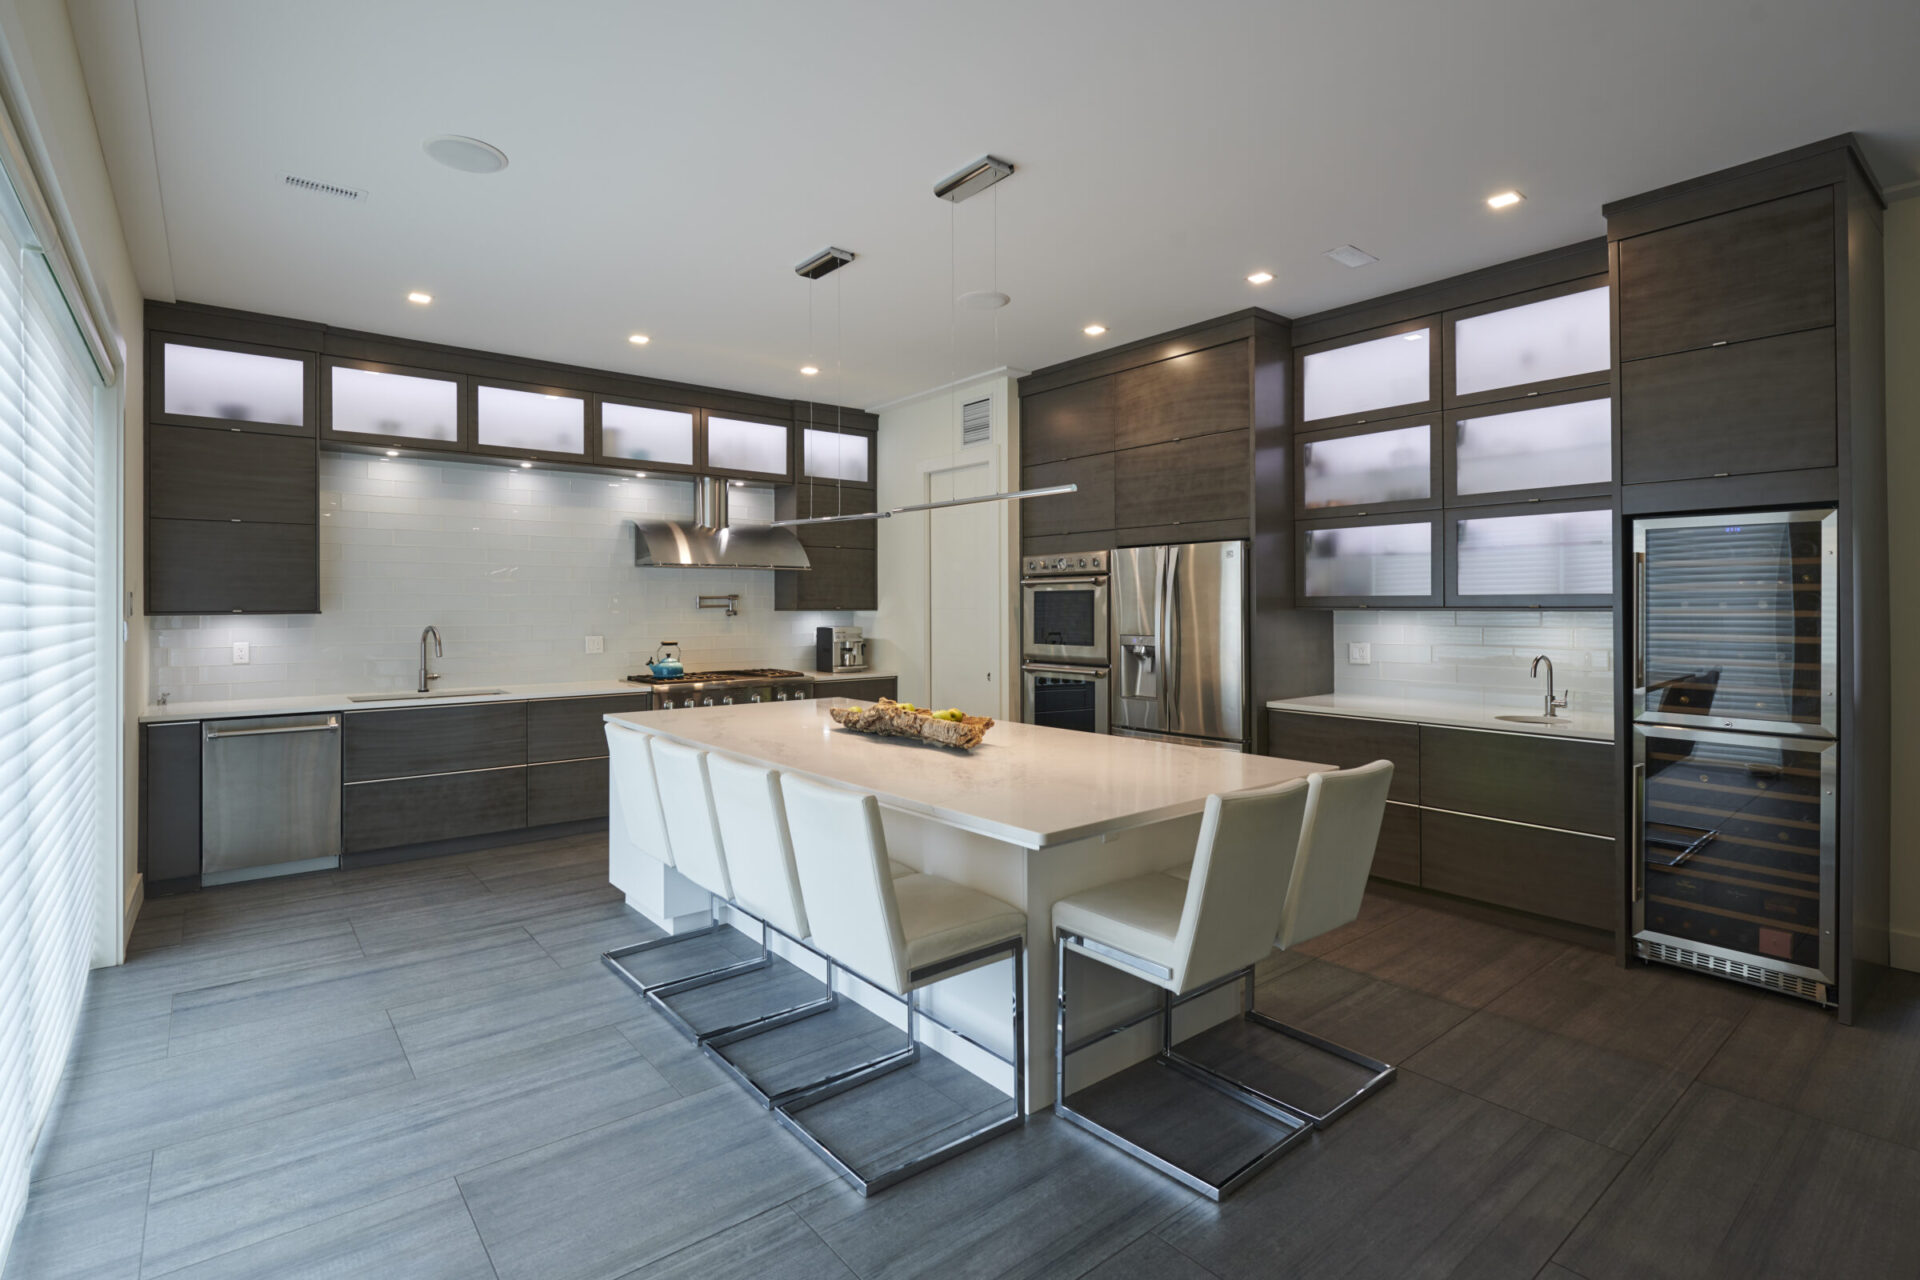 A modern kitchen with dark wood cabinets, stainless steel appliances, a white countertop island with seating, and a wine fridge. Elegant and spacious design.